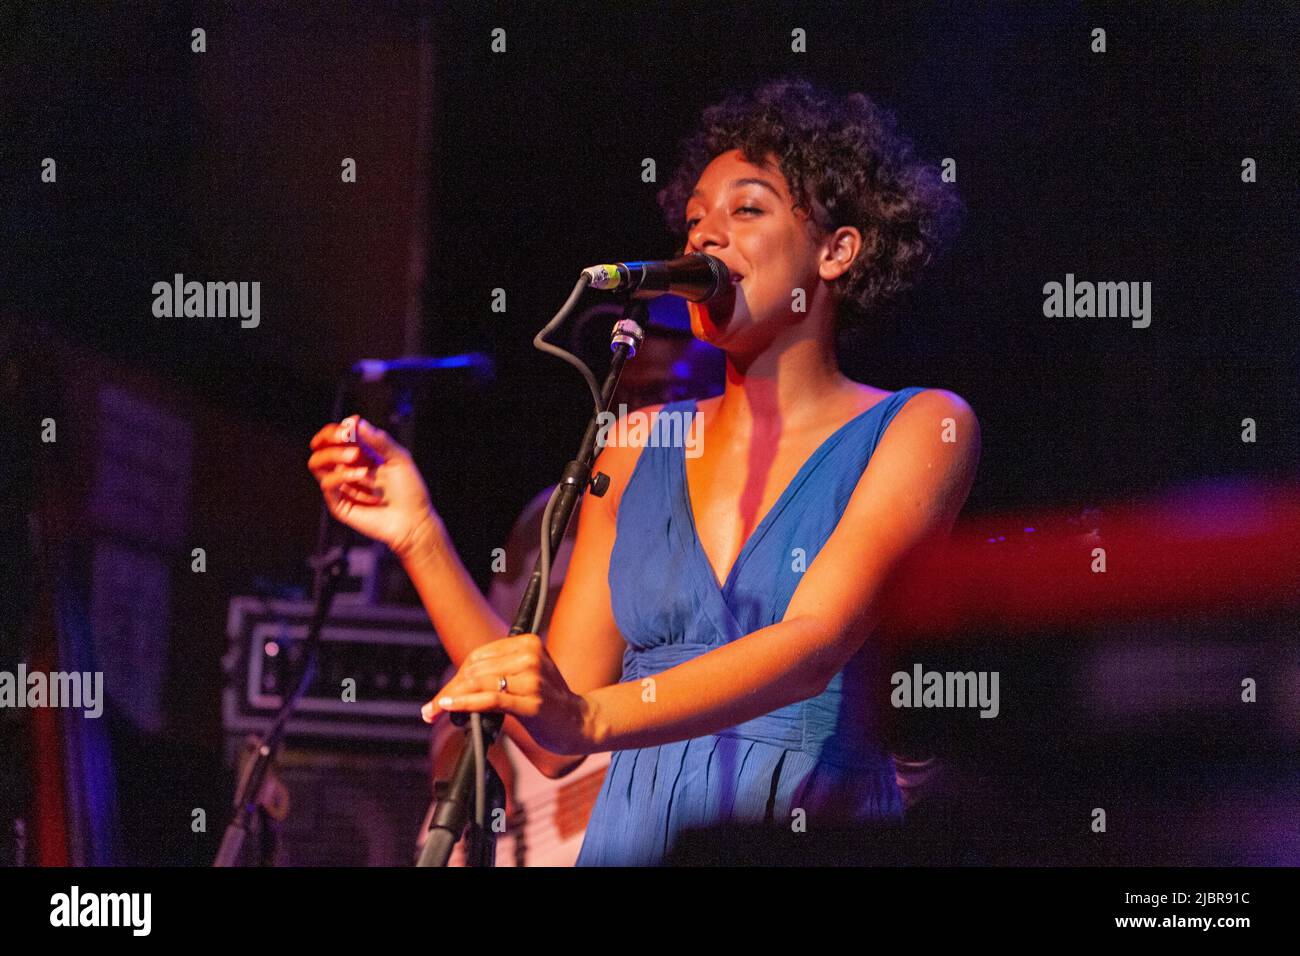 Corinne Bailey Rae performing at the Gypsy Tea Rooms 12th August 2006, Deep Ellum, Dallas, Texas, United States of America. Stock Photo